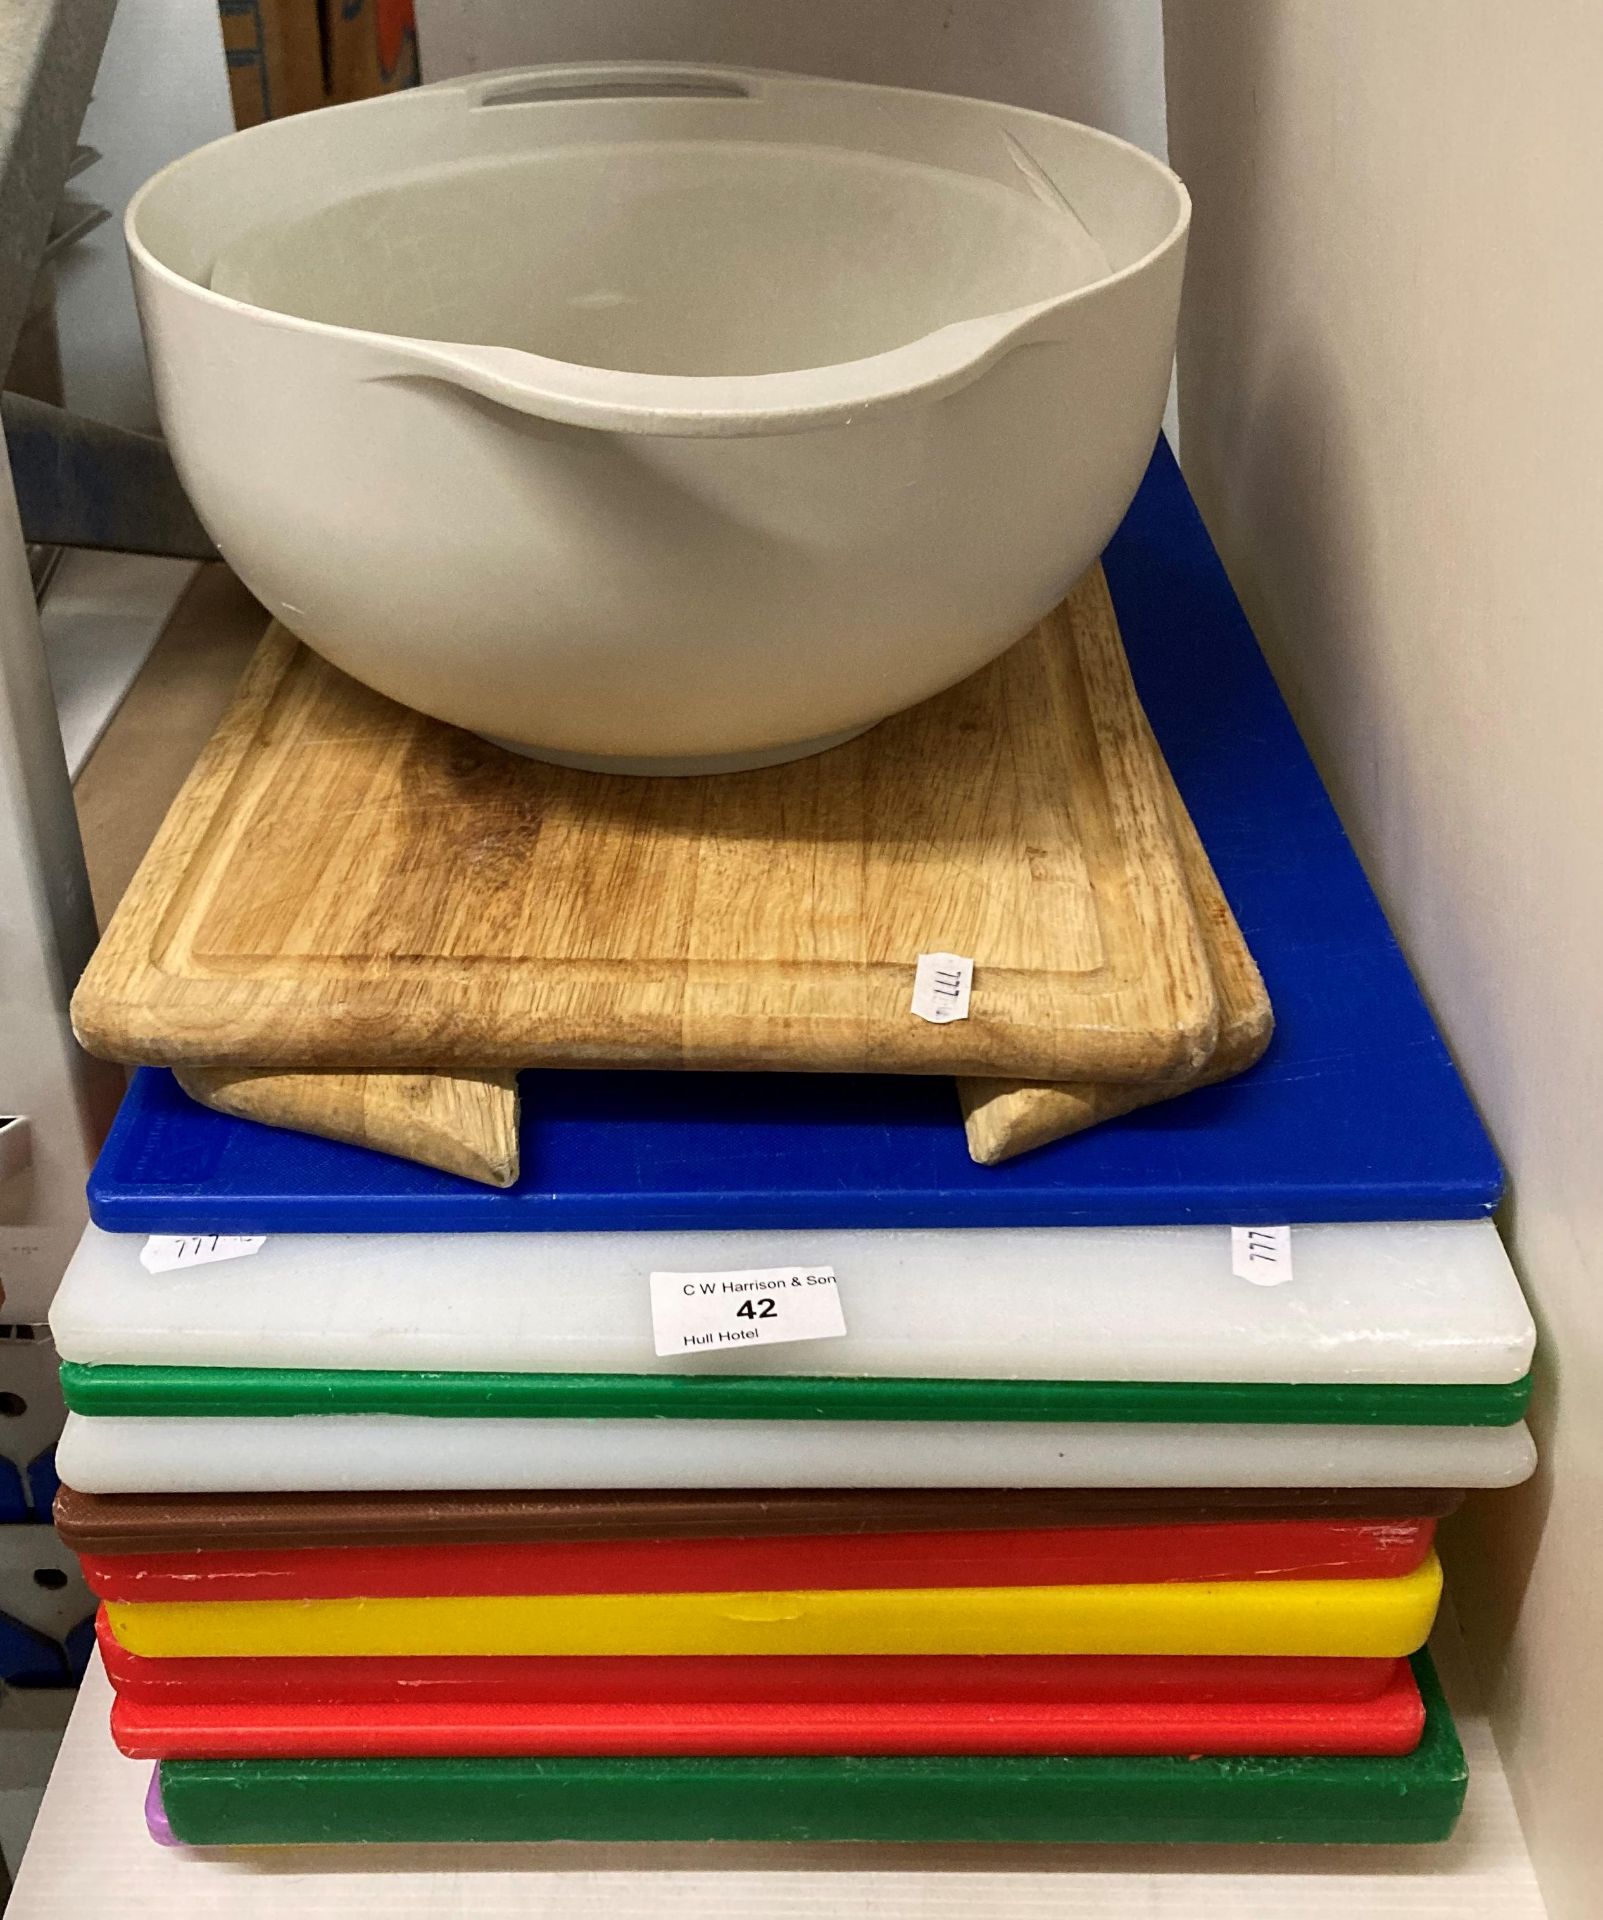 14 x assorted polypropylene and wood chopping boards (saleroom location: V02)